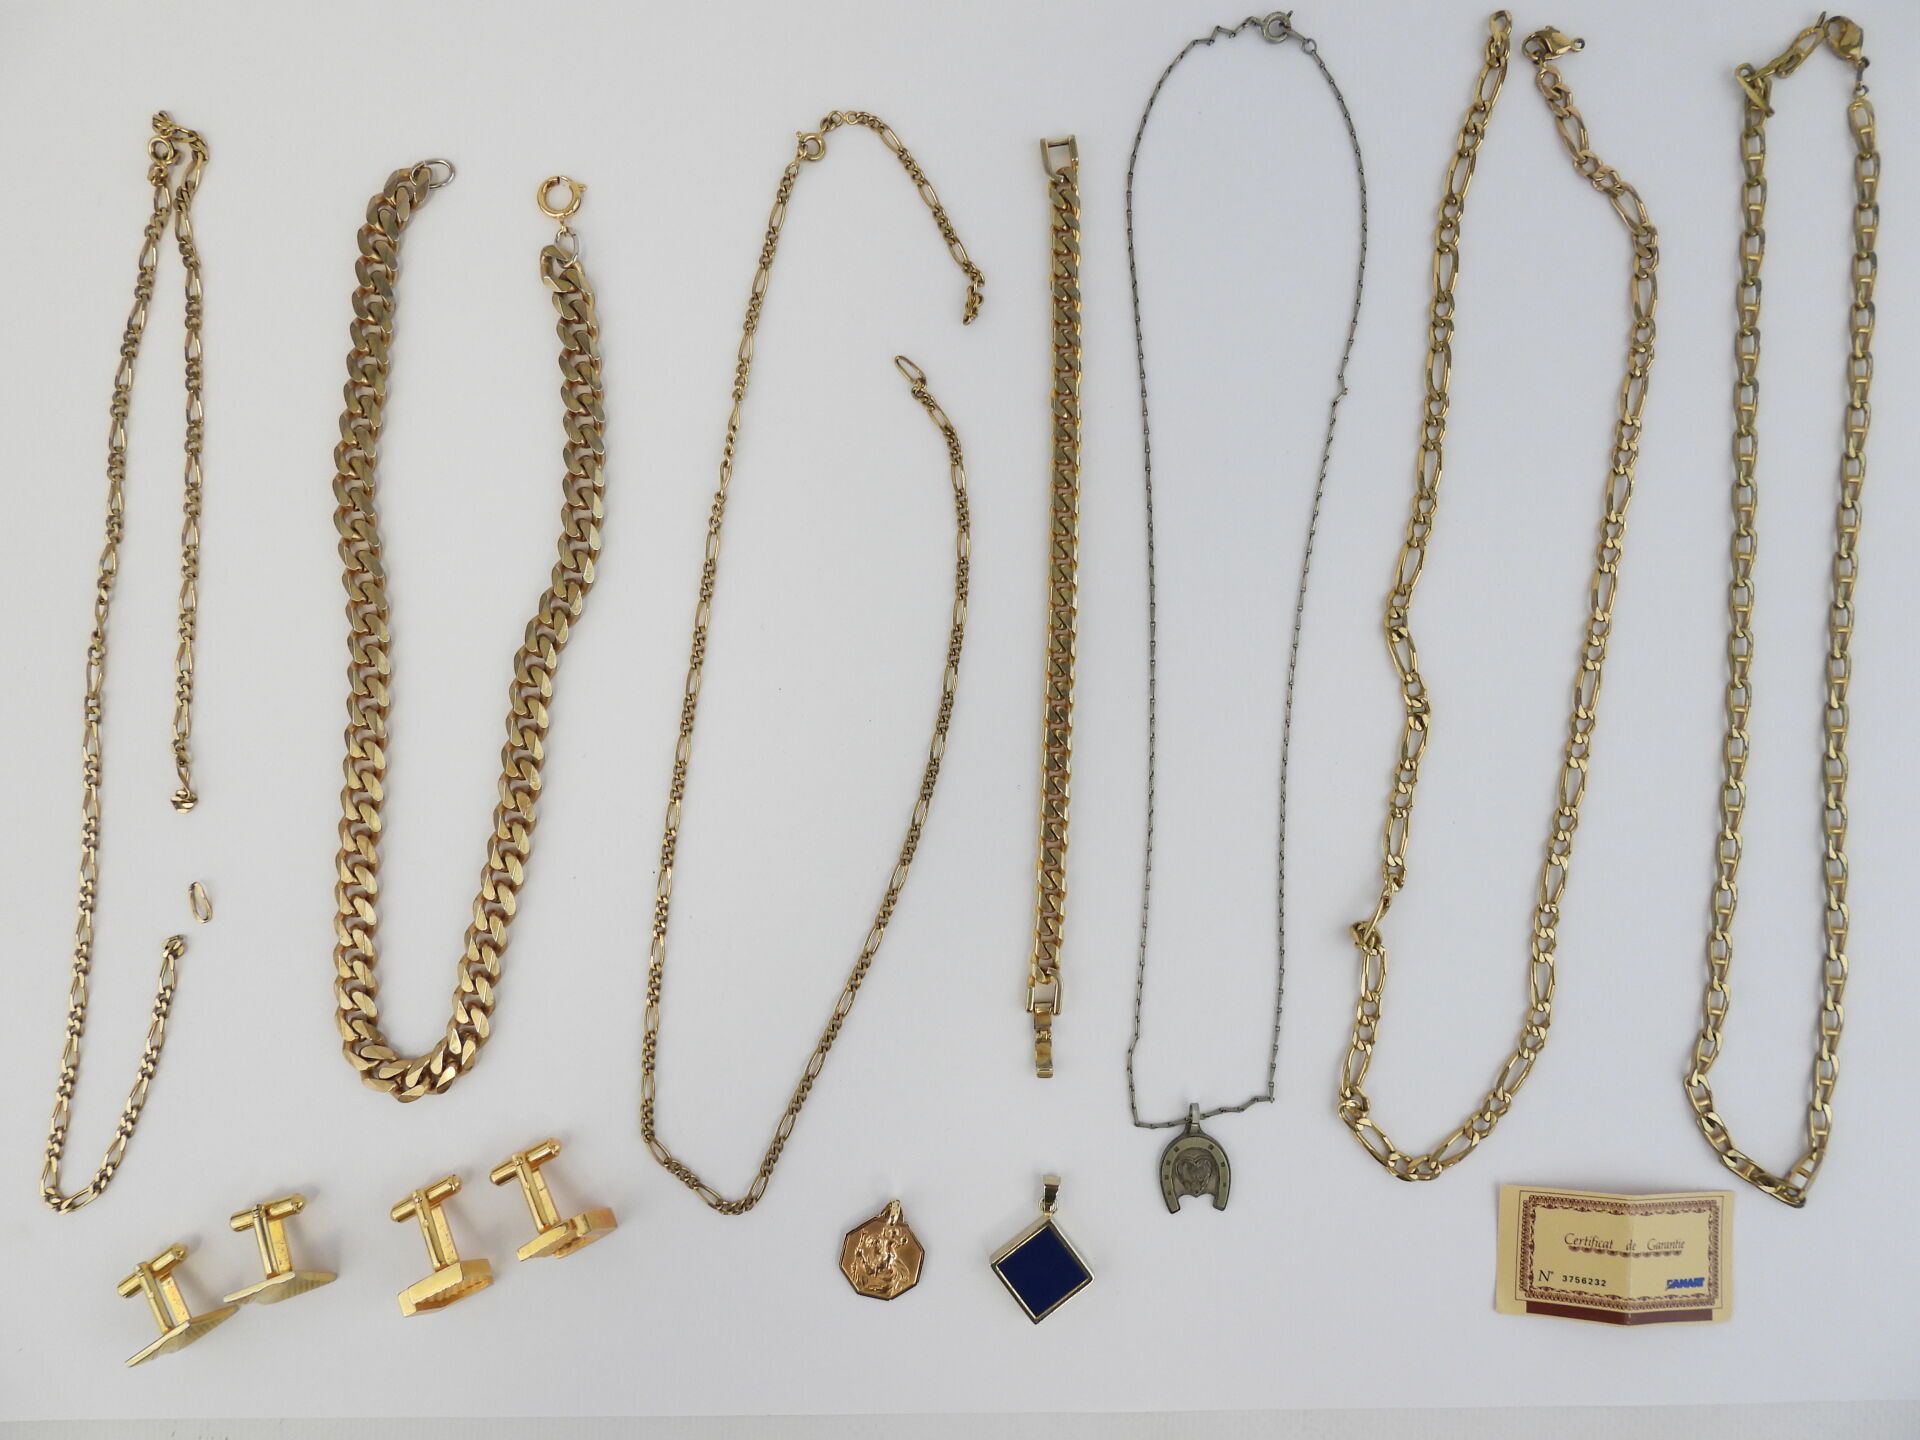 Null Lot of metal jewelry and various, necklaces, pendant. Accidents